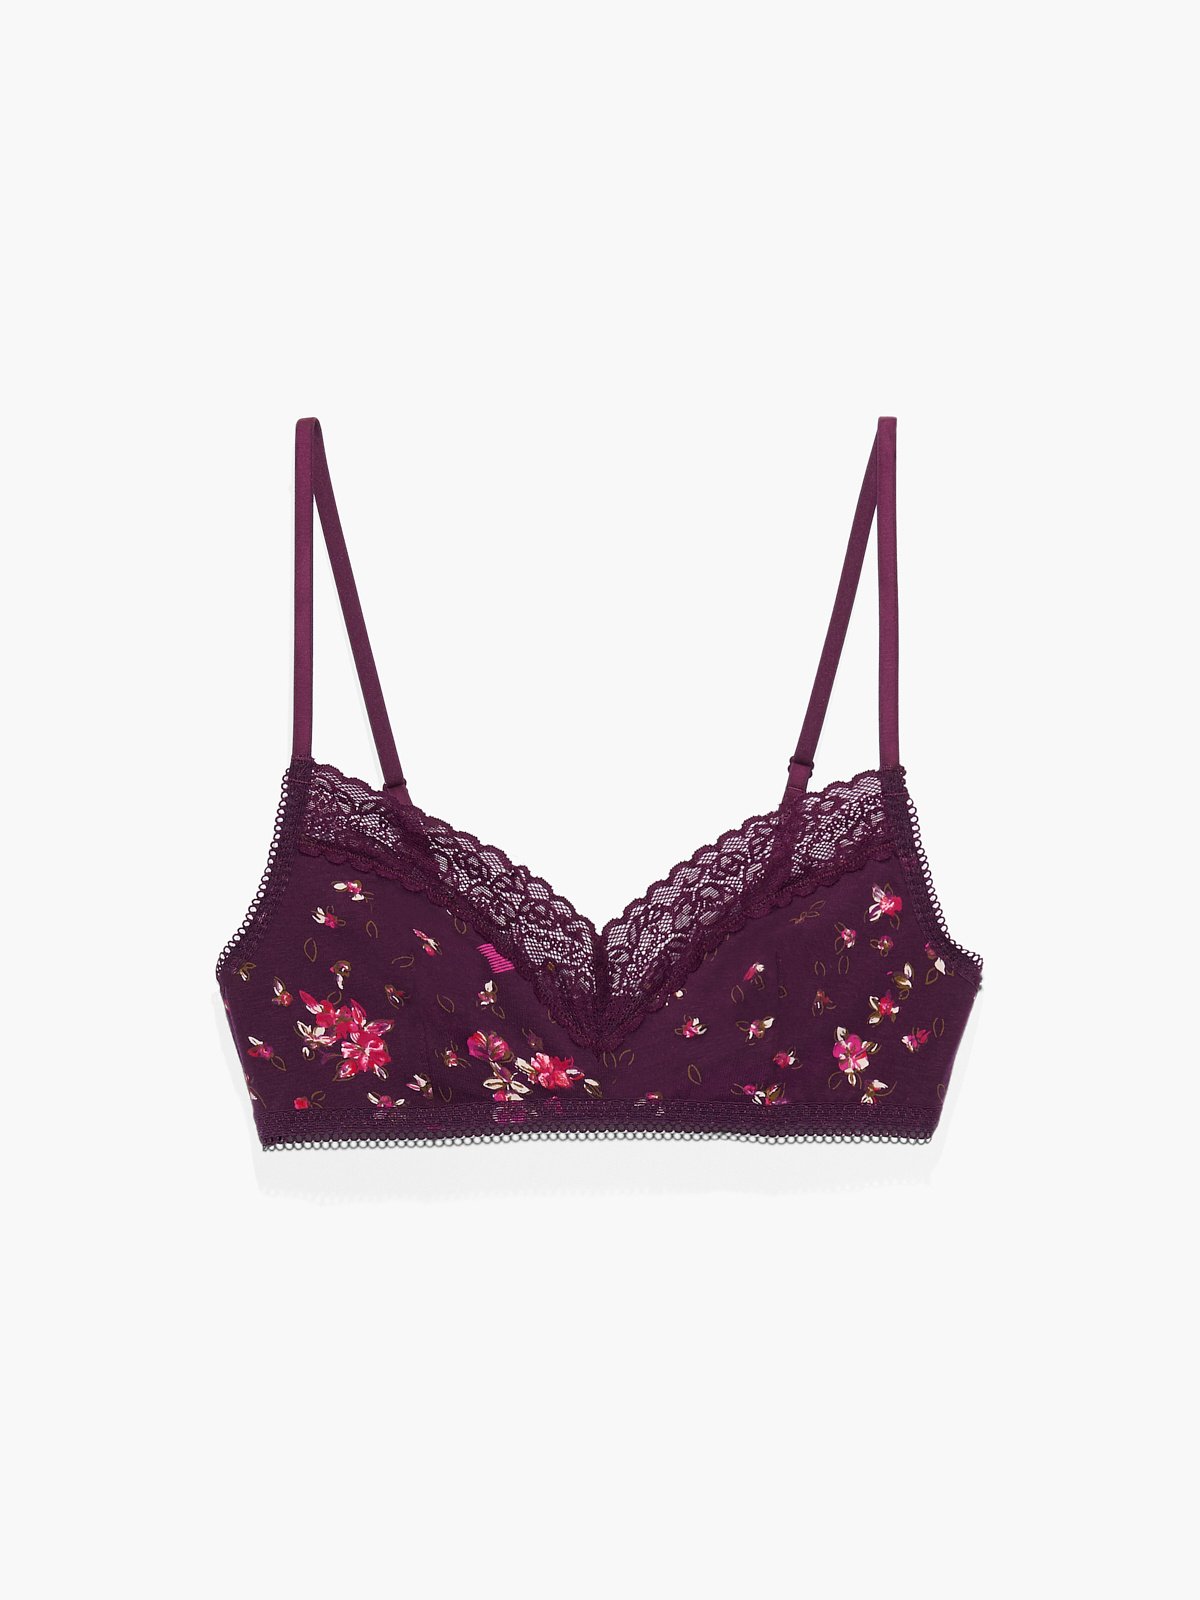 Buy Three Pack Organic Cotton Bralette for Her Gift Idea Comfy Cotton Bras  Bundle Avocado, Pink, Black Online in India 